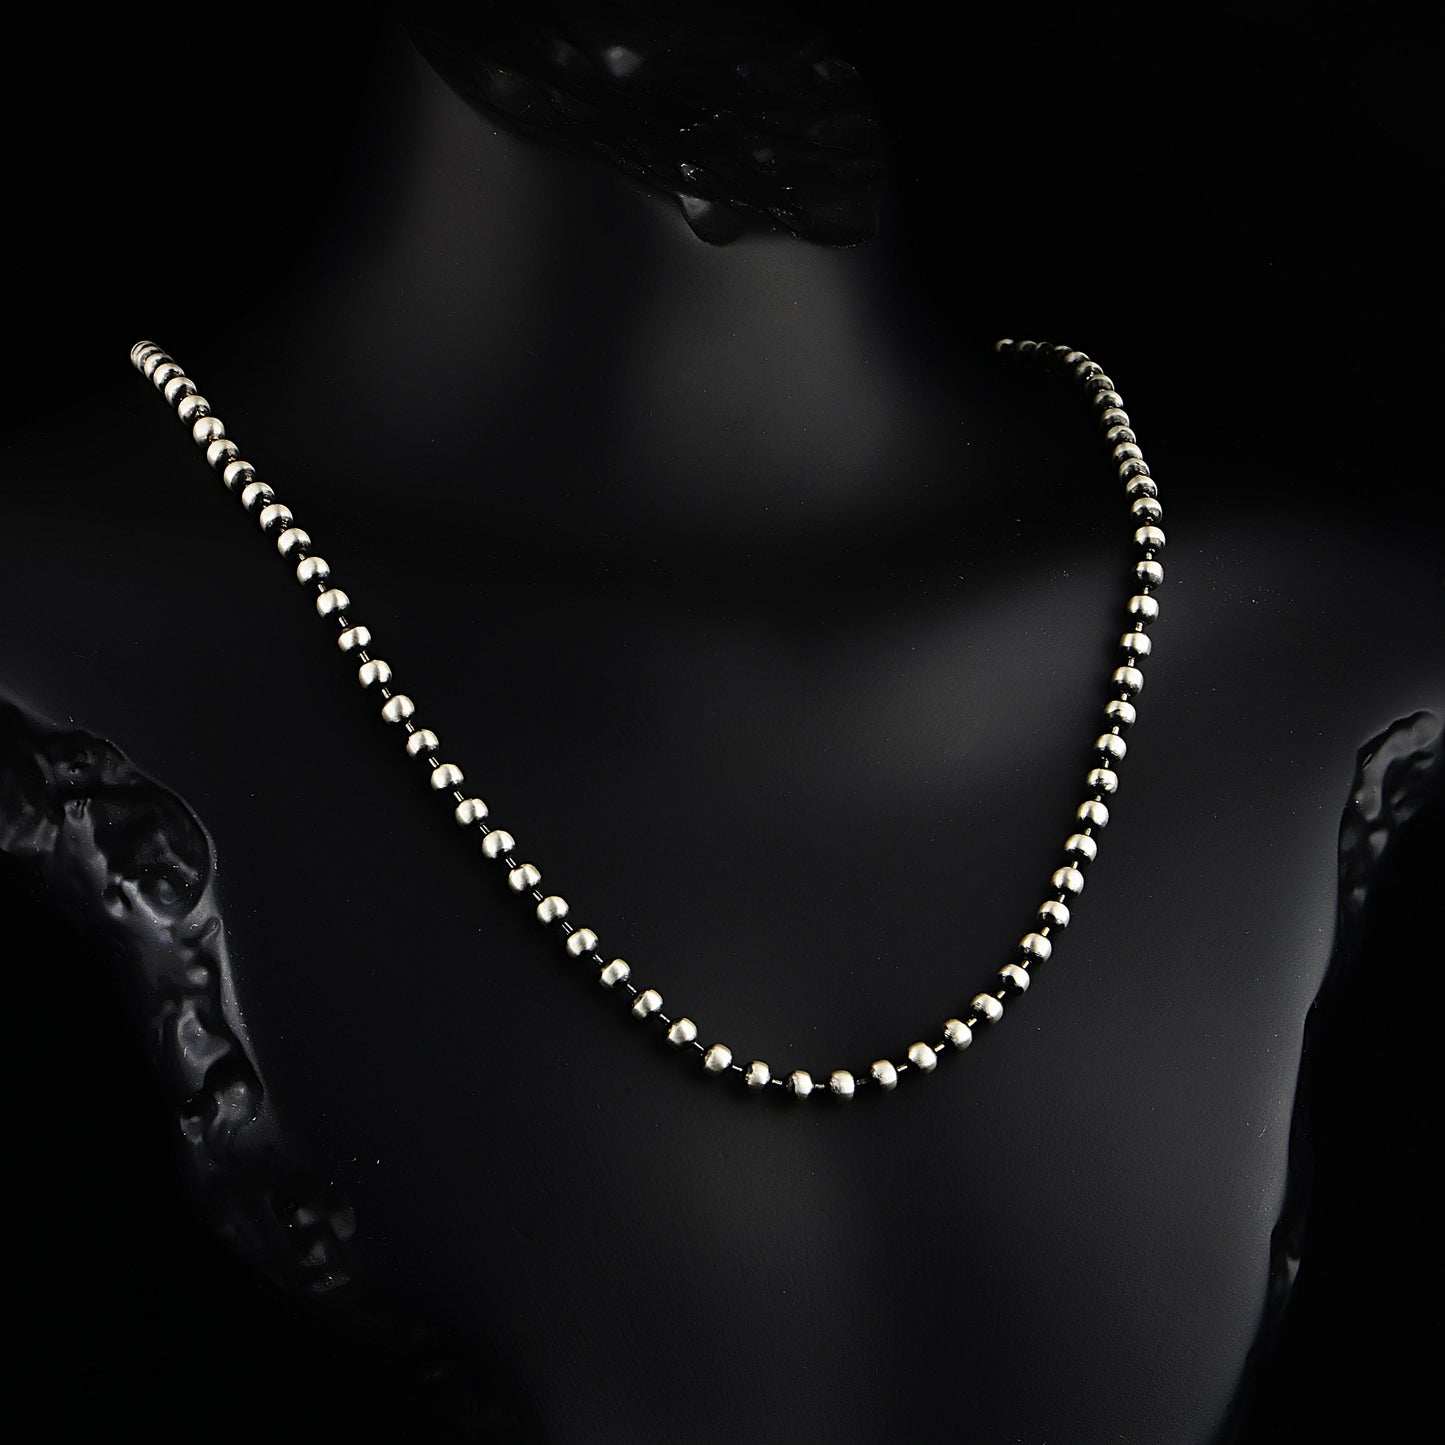 Silver Ball Bead Chain Necklace